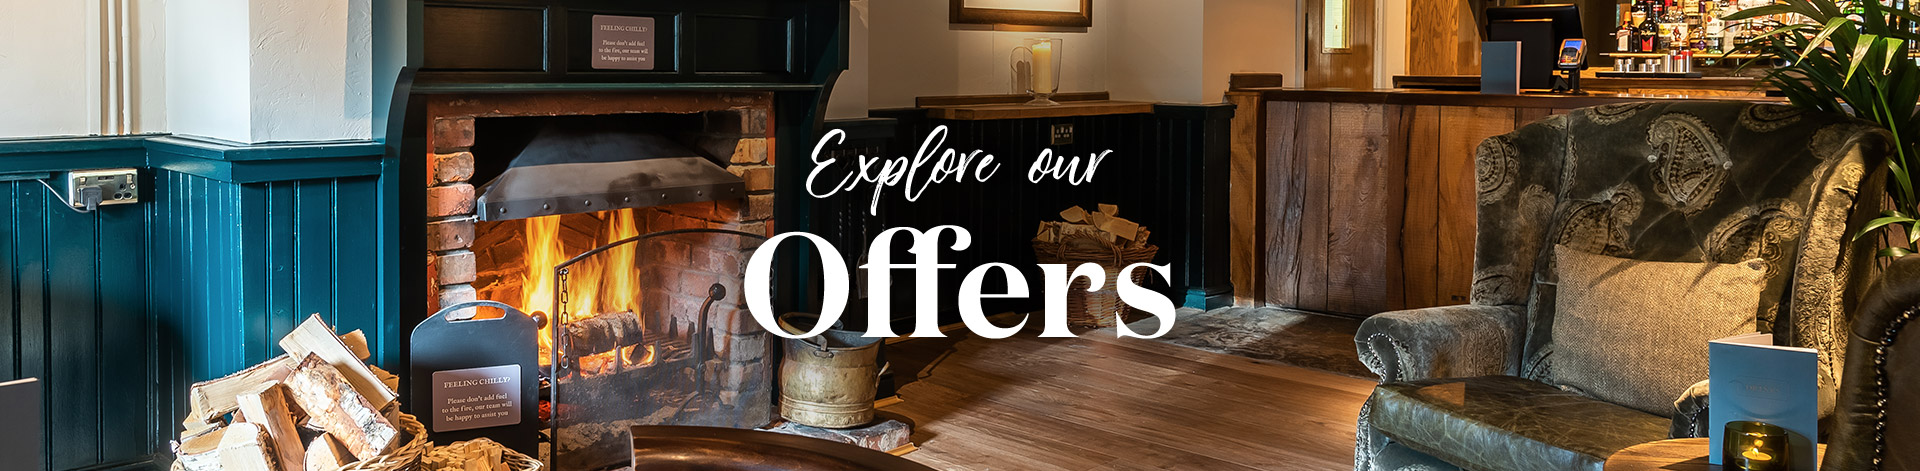 Our latest offers at Ye Olde Six Bells